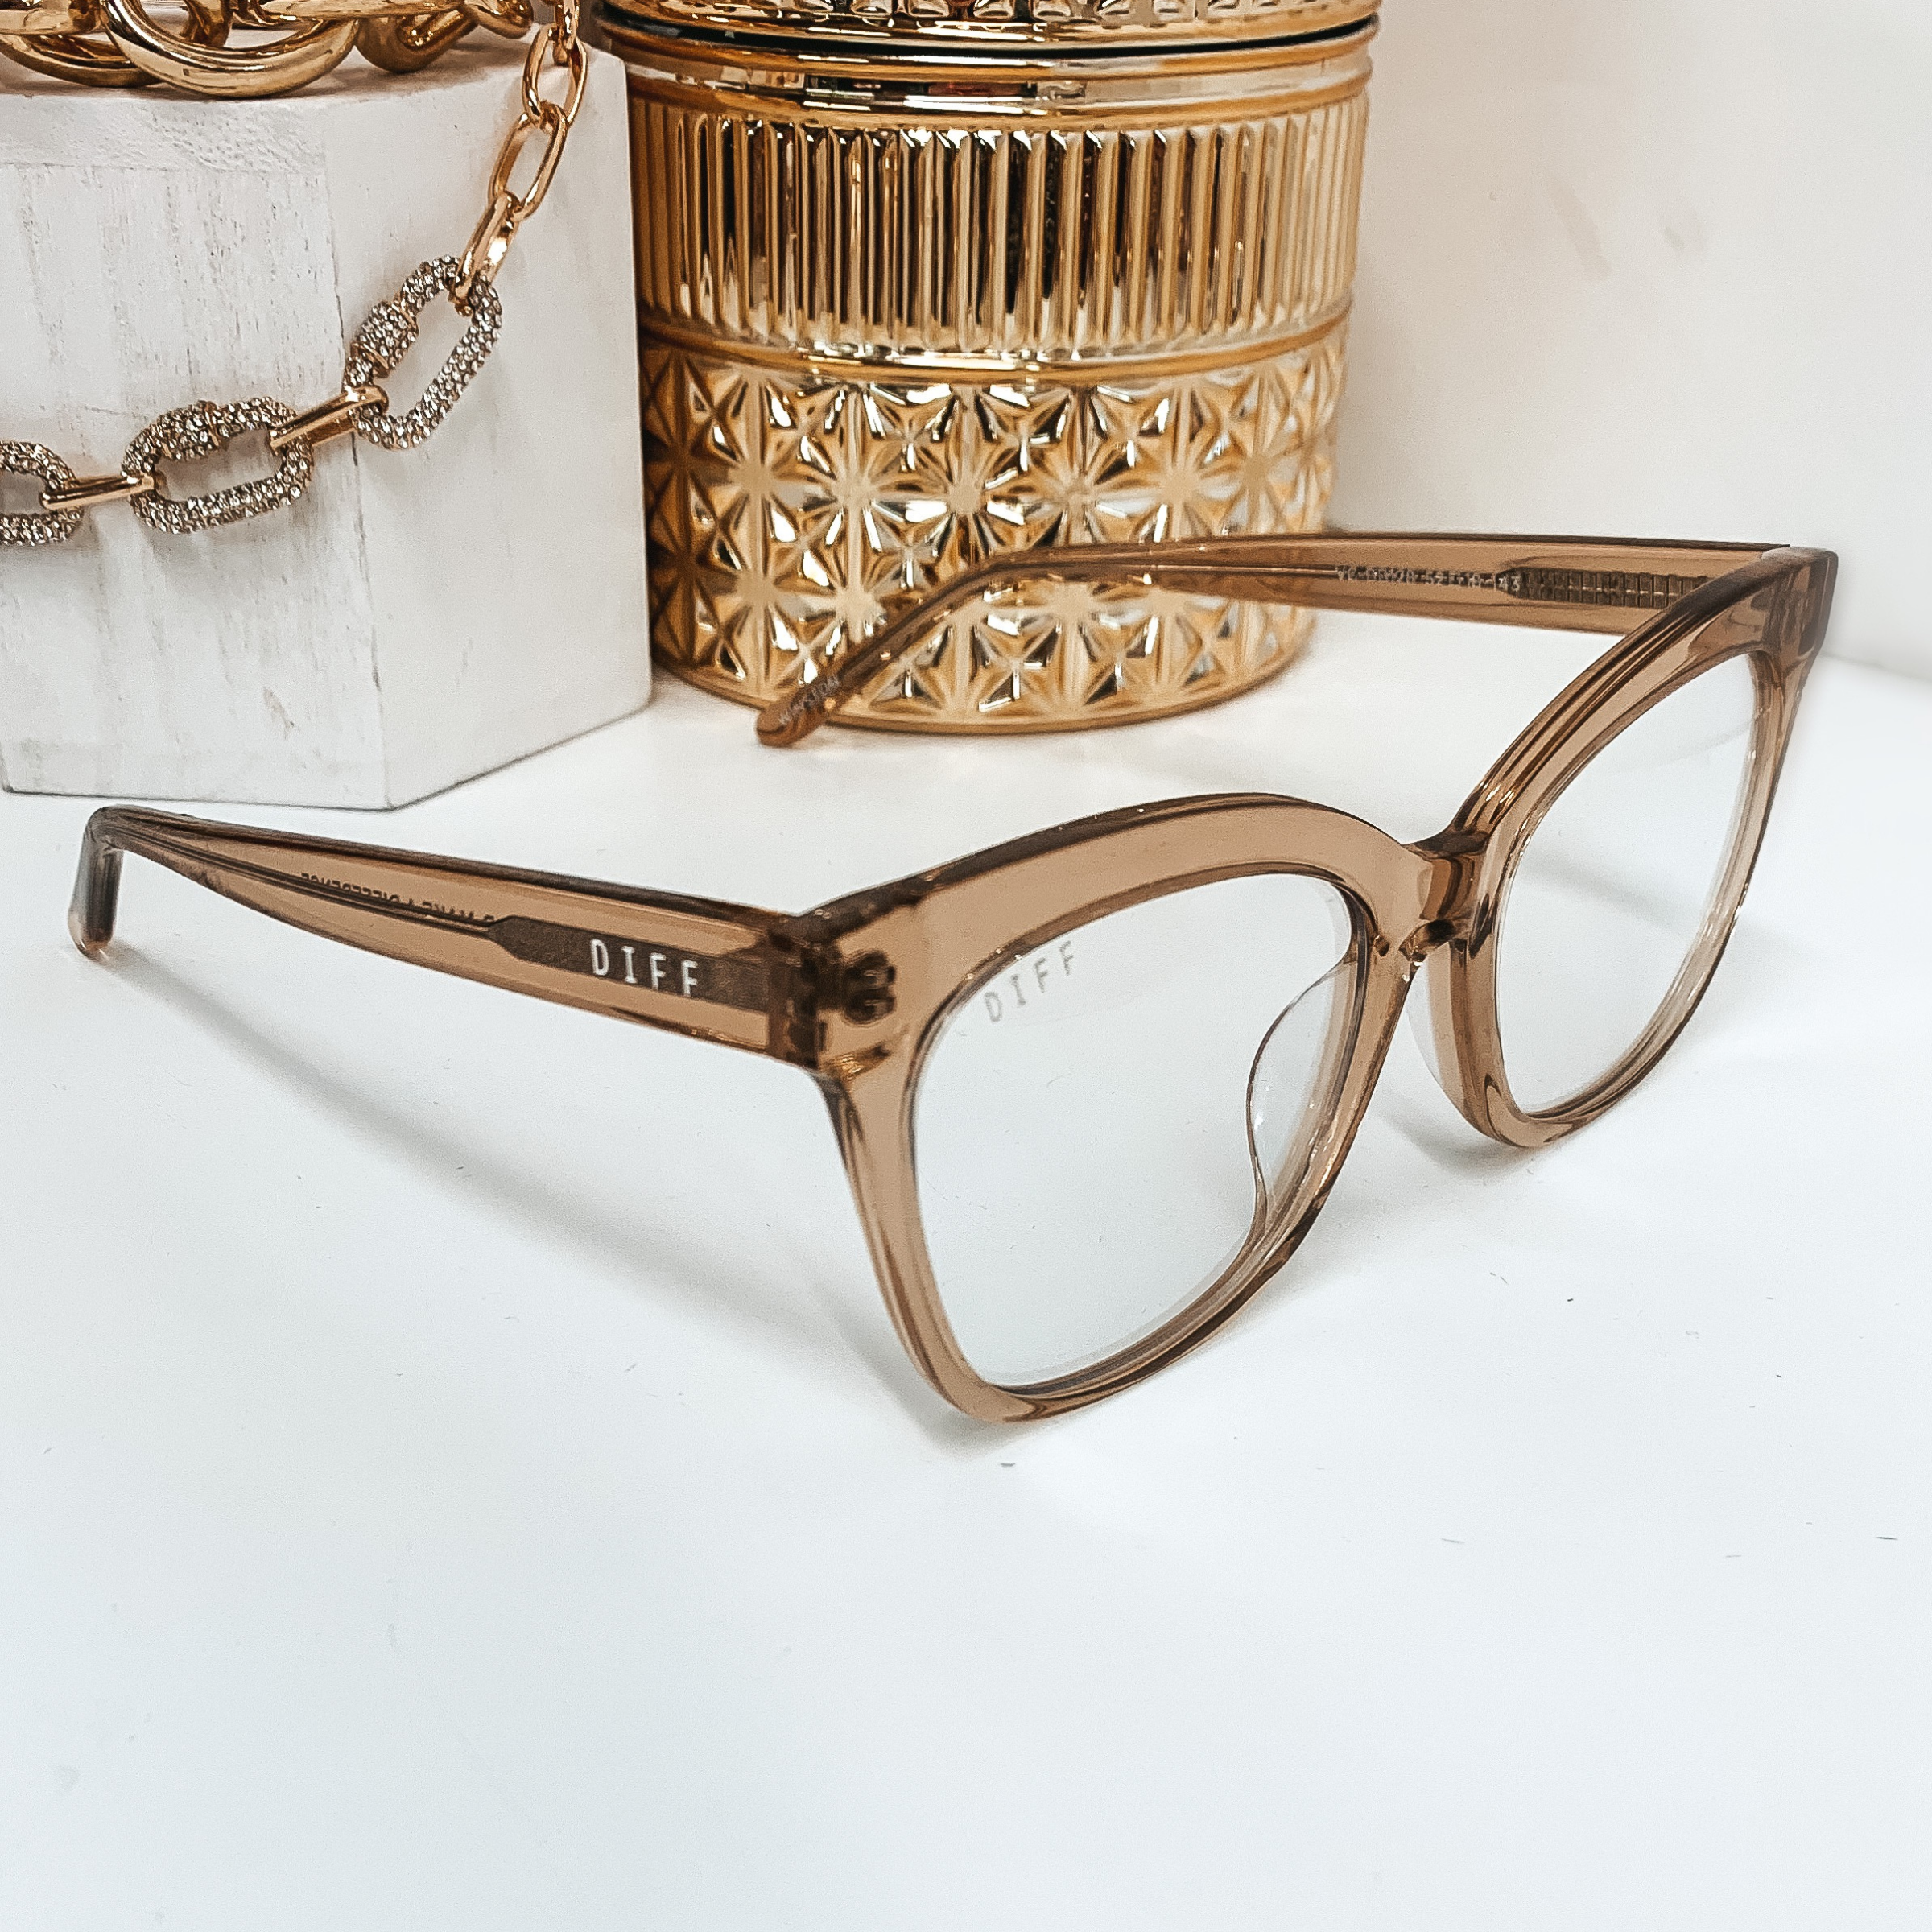 DIFF | Winston Blue Light Tech Lens Glasses in Vintage Crystal - Giddy Up Glamour Boutique